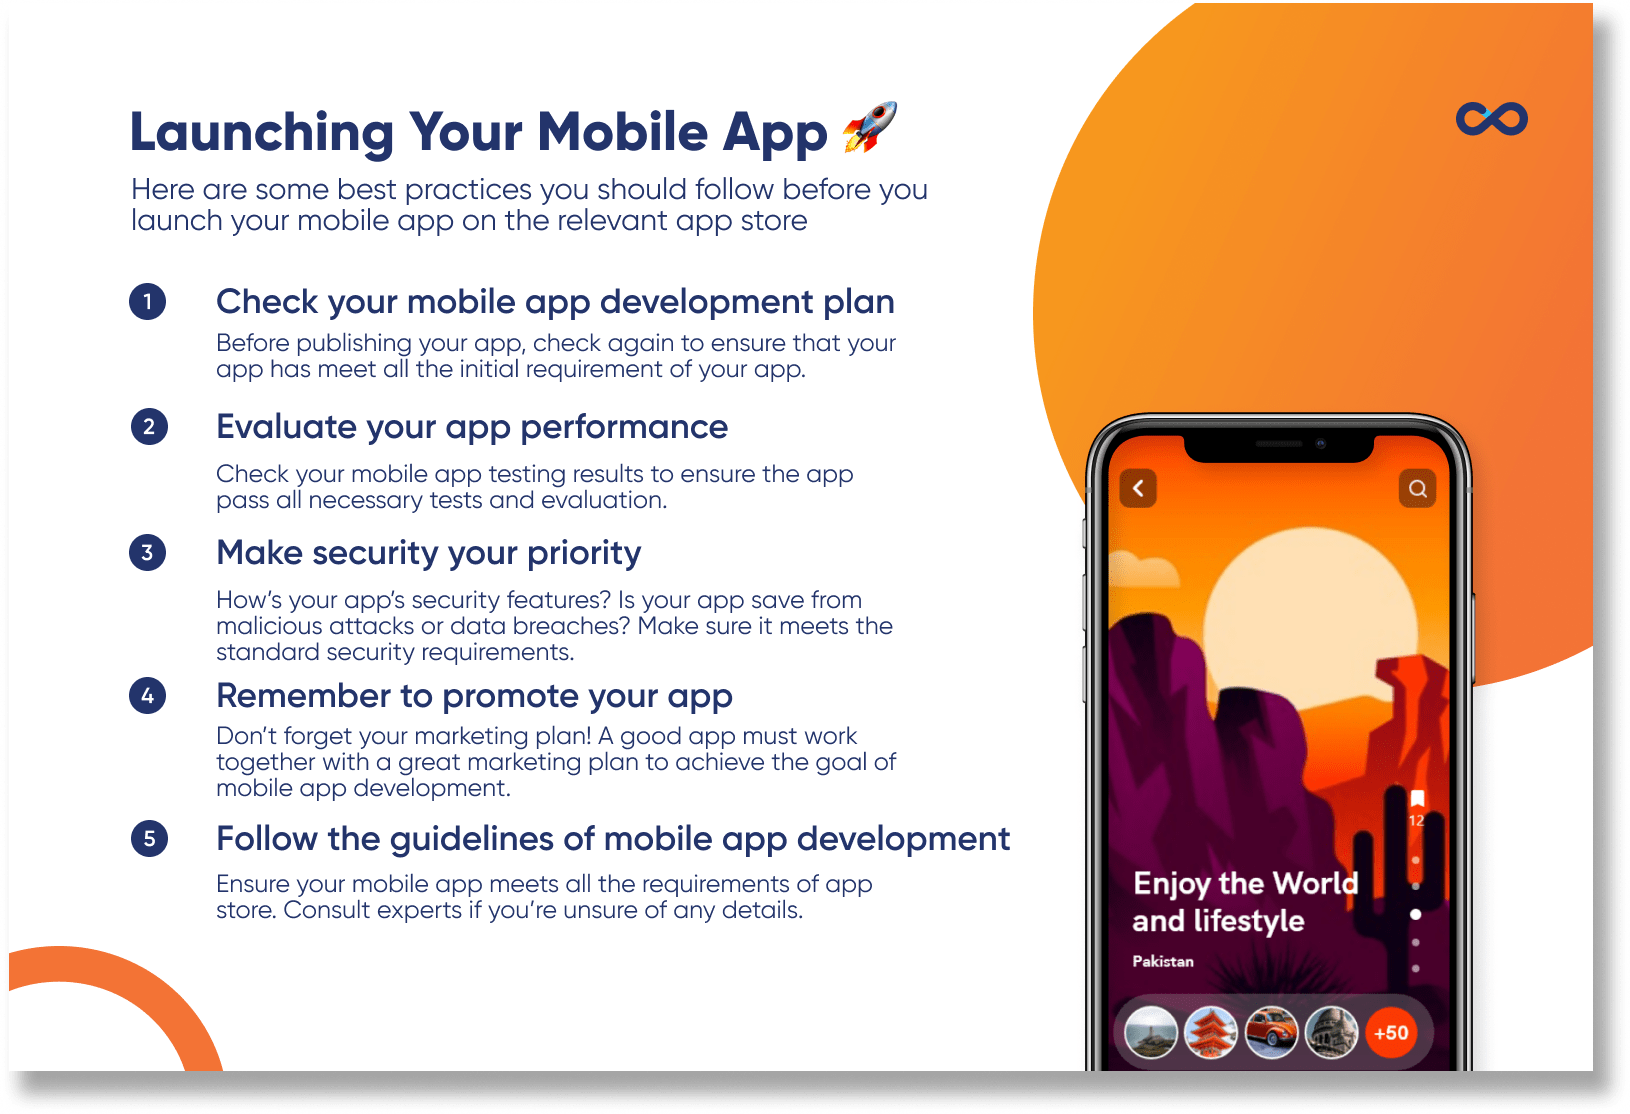 details before launching your mobile app